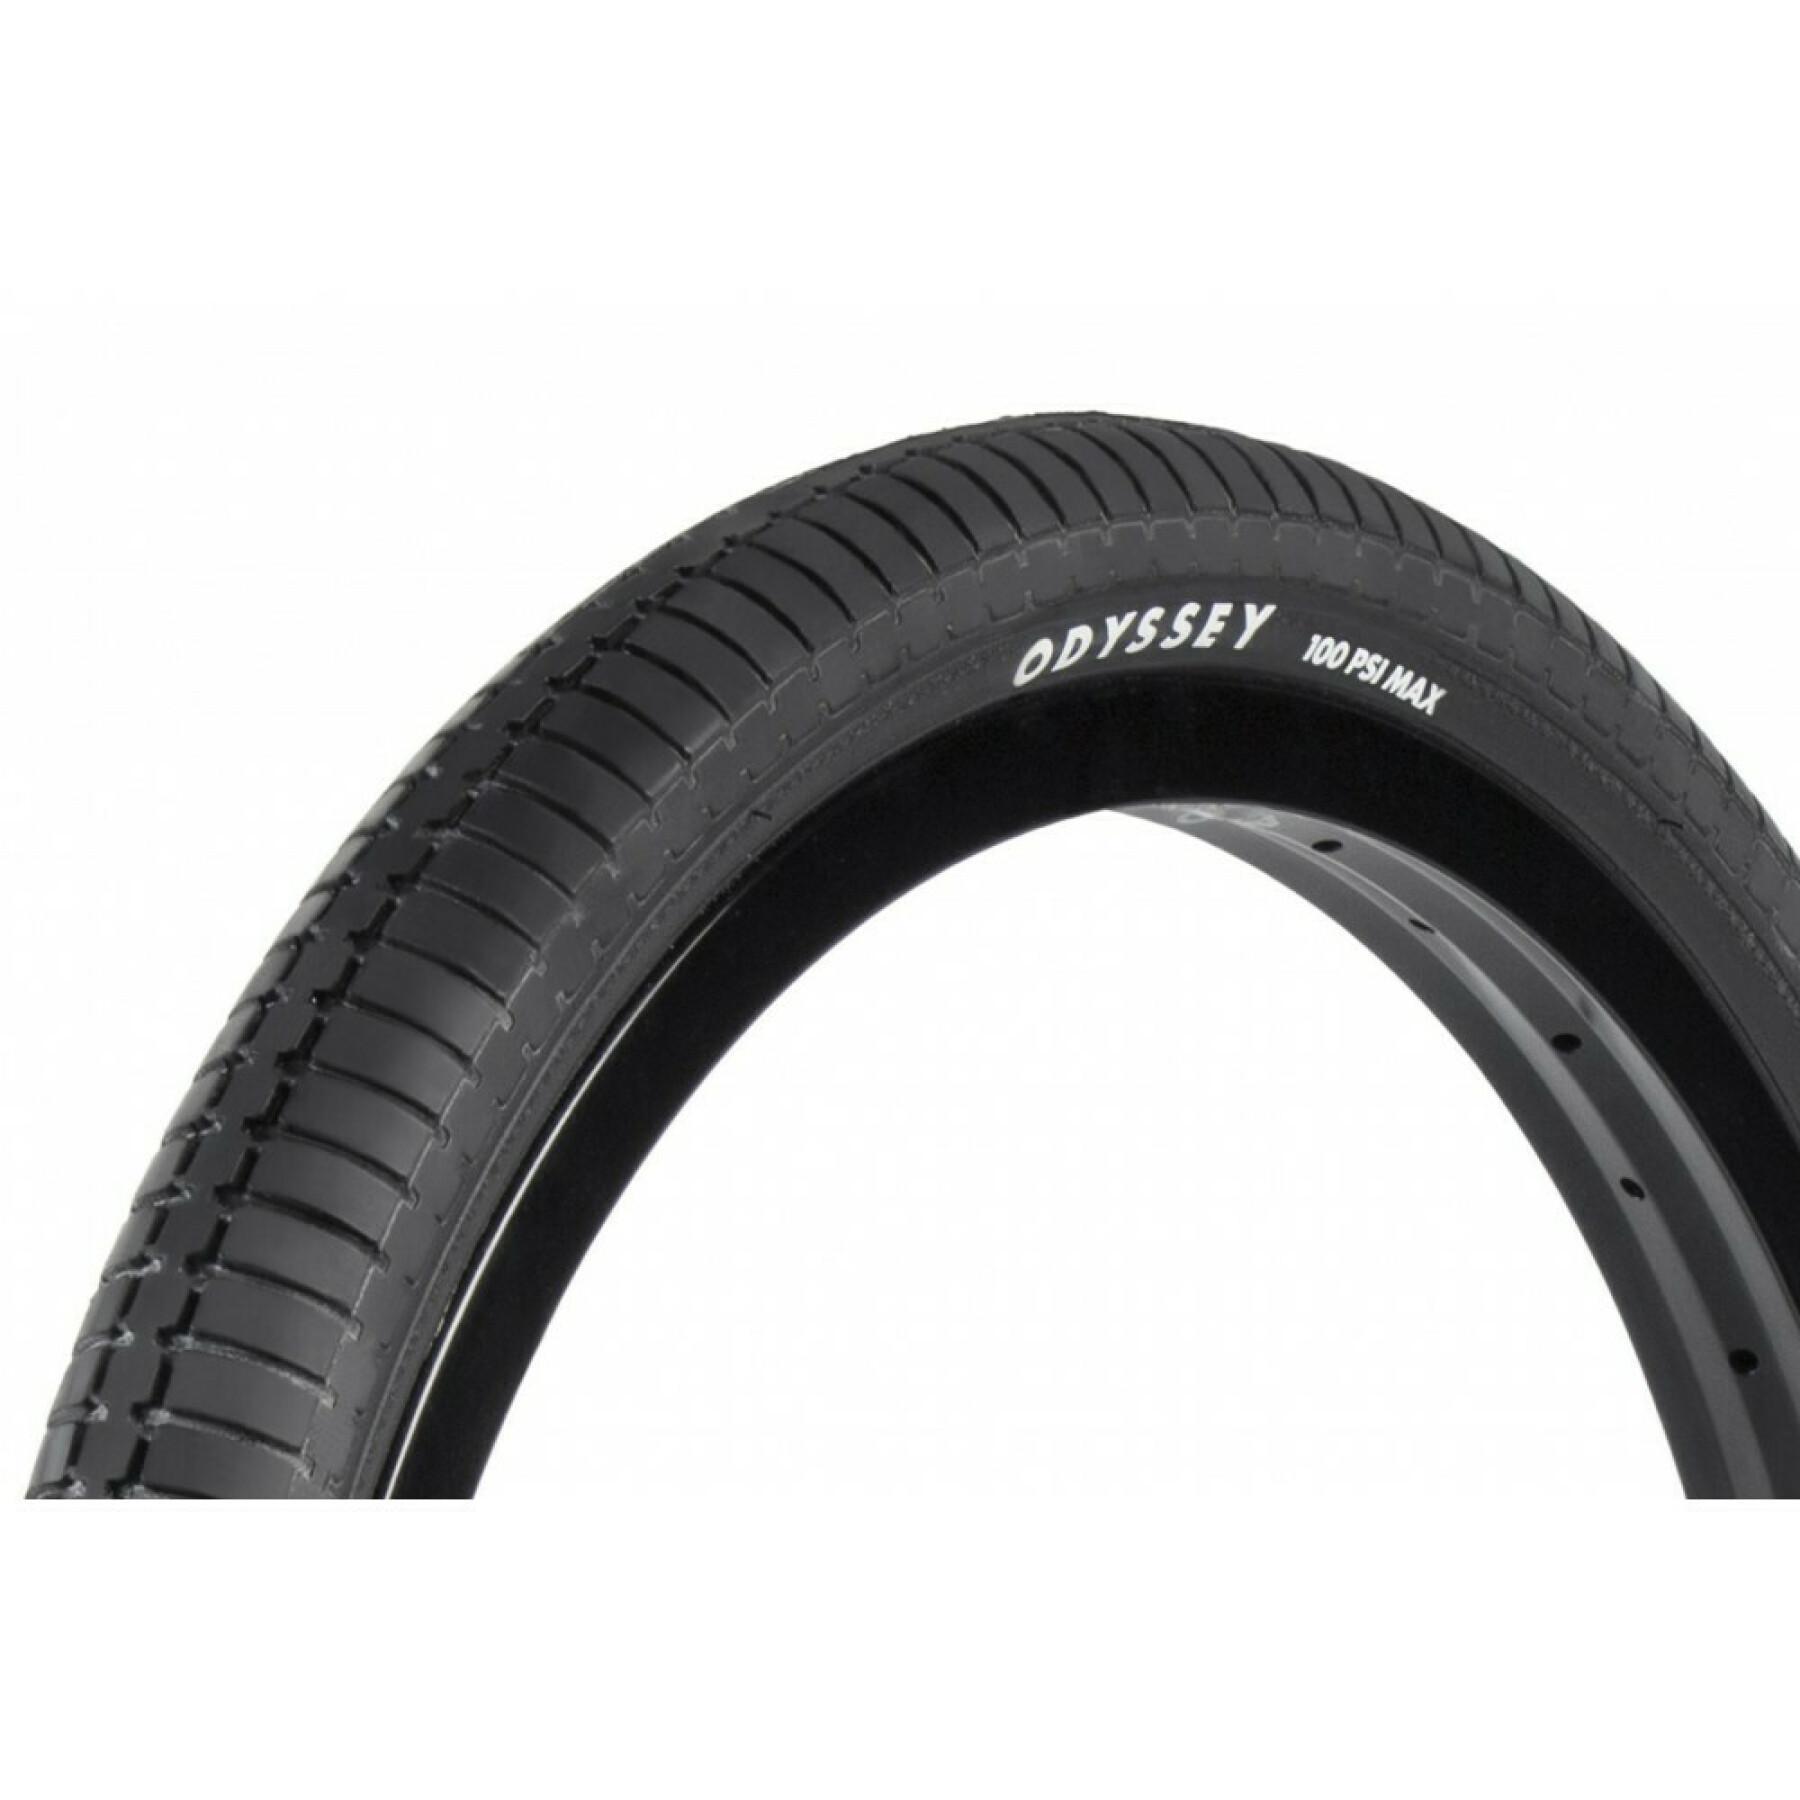 Band Odyssey Frequency G Tire 20